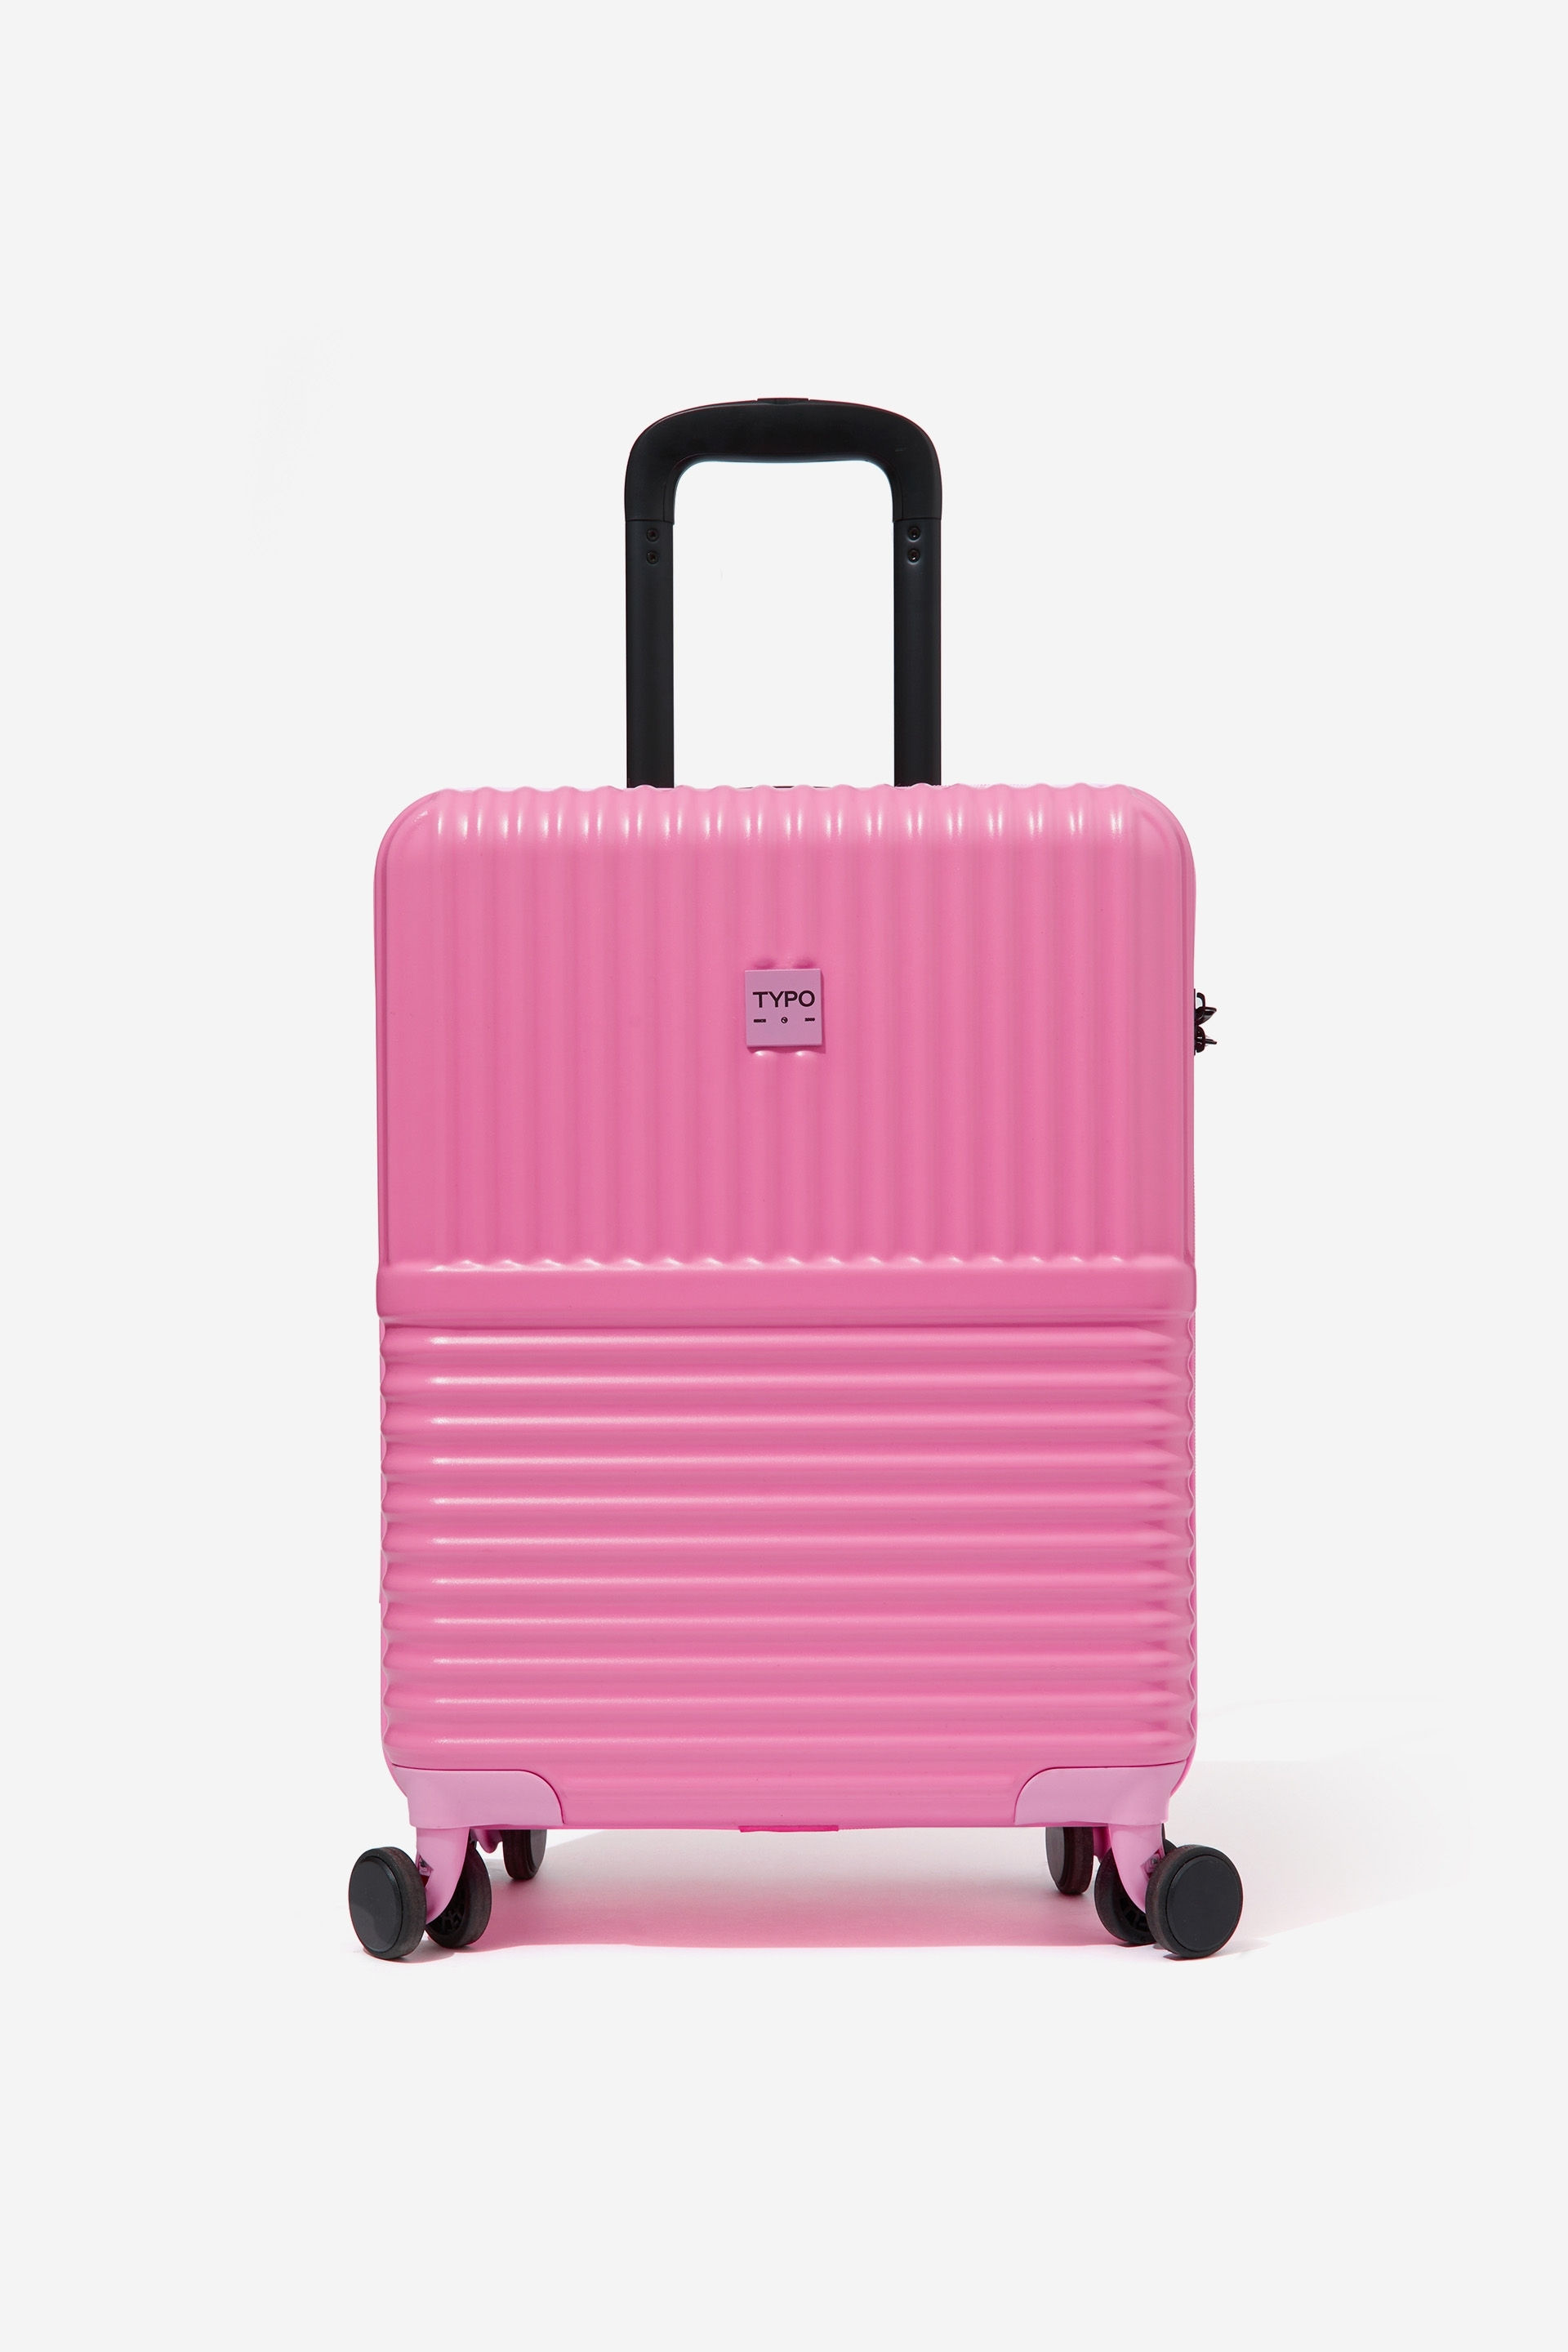 Typo - 20 Inch Carry On Suitcase - Rosa powder